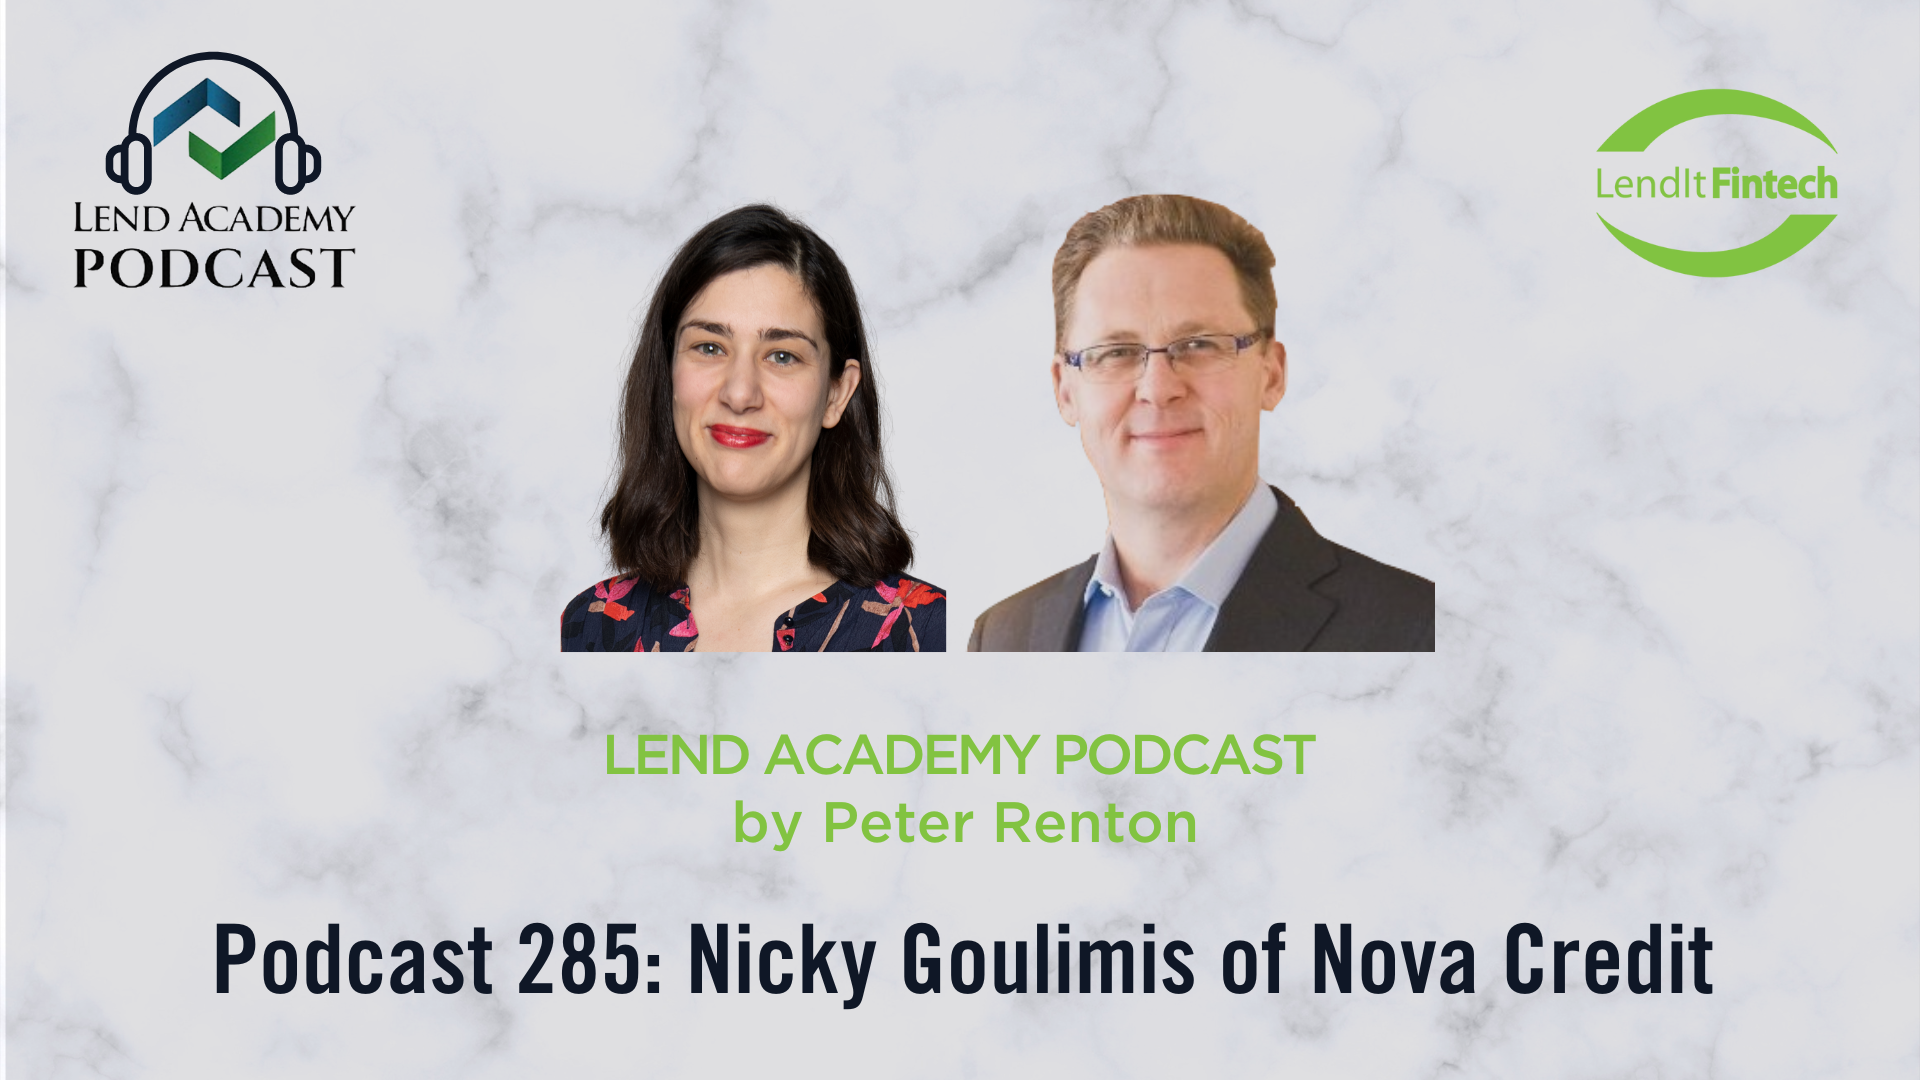 Nicky Goulimis, Co-Founder & COO of Nova Credit